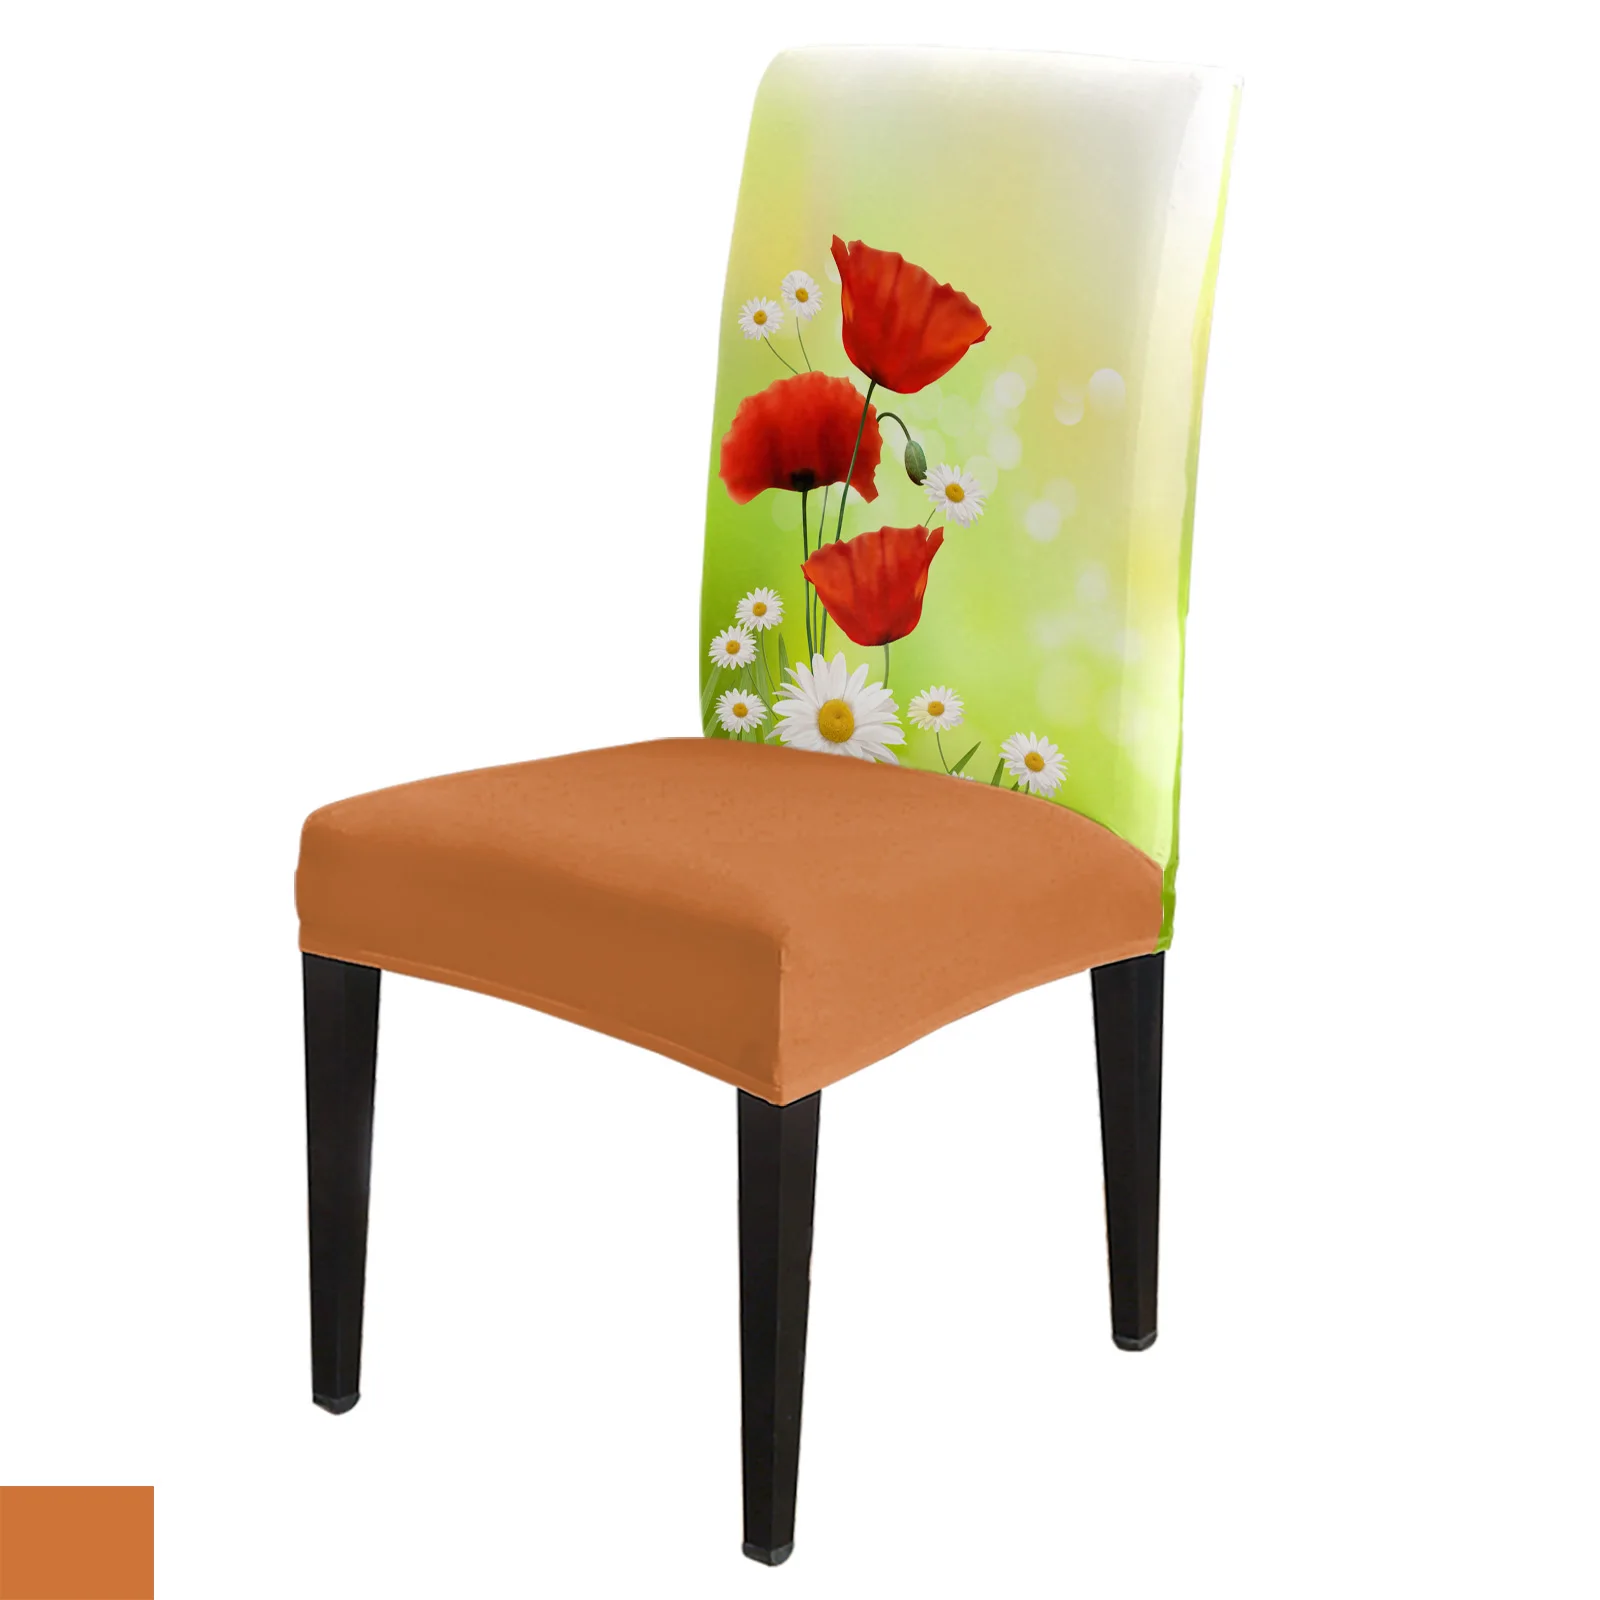 

Poppy Flower Daisy Dining Chair Cover 4/6/8PCS Spandex Elastic Chair Slipcover Case for Wedding Hotel Banquet Dining Room